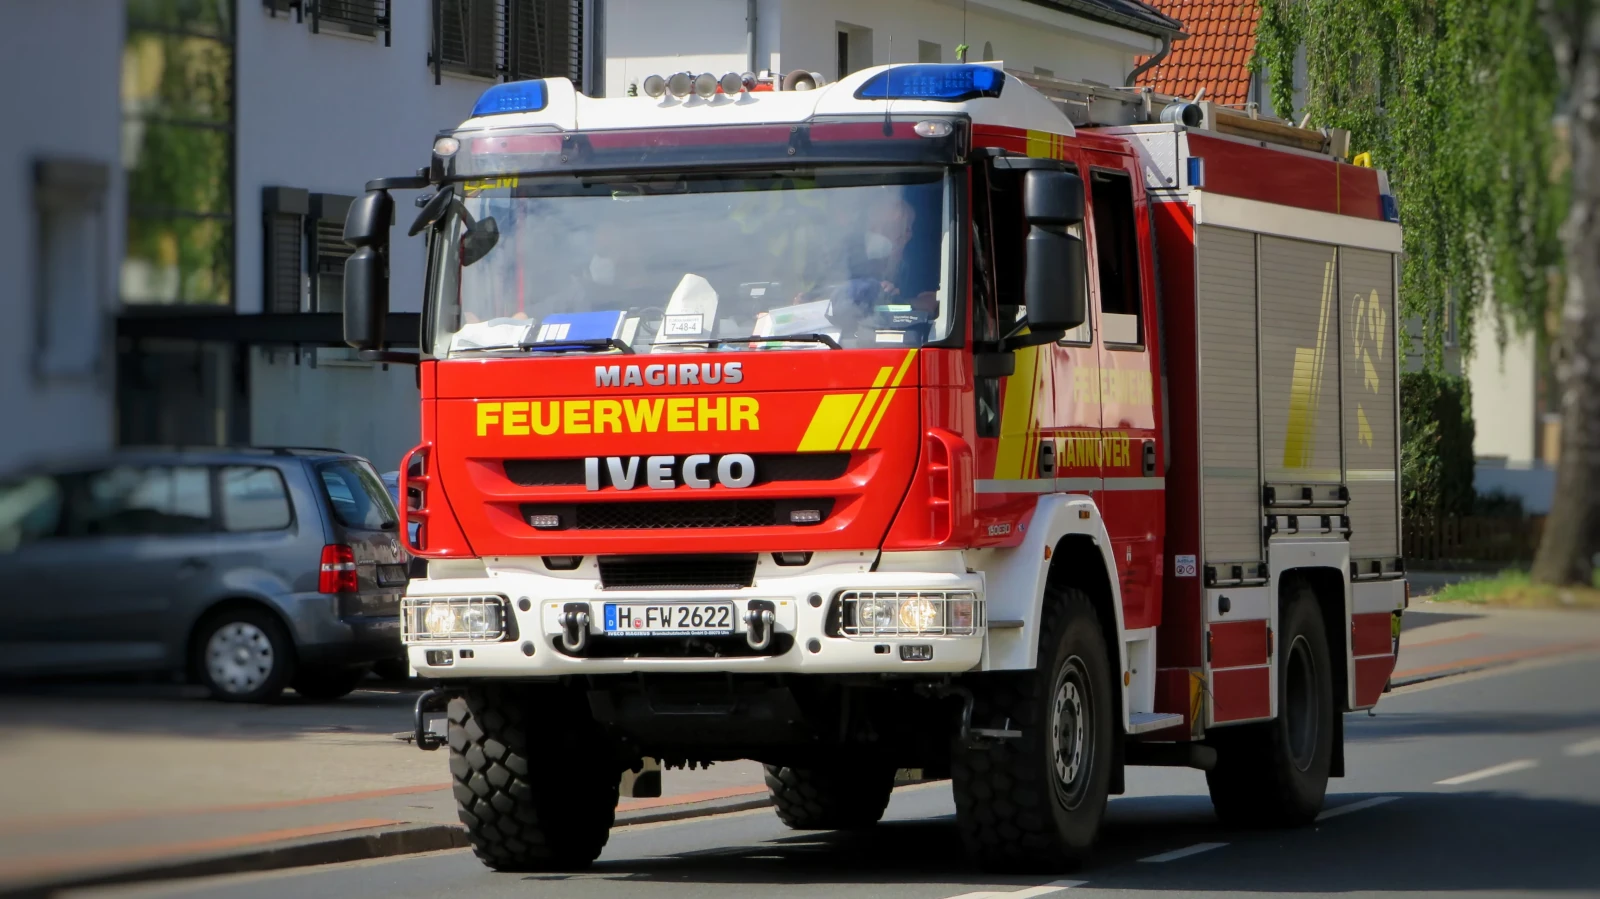 A serious traffic accident caused Affelner Strasse to be closed for hours